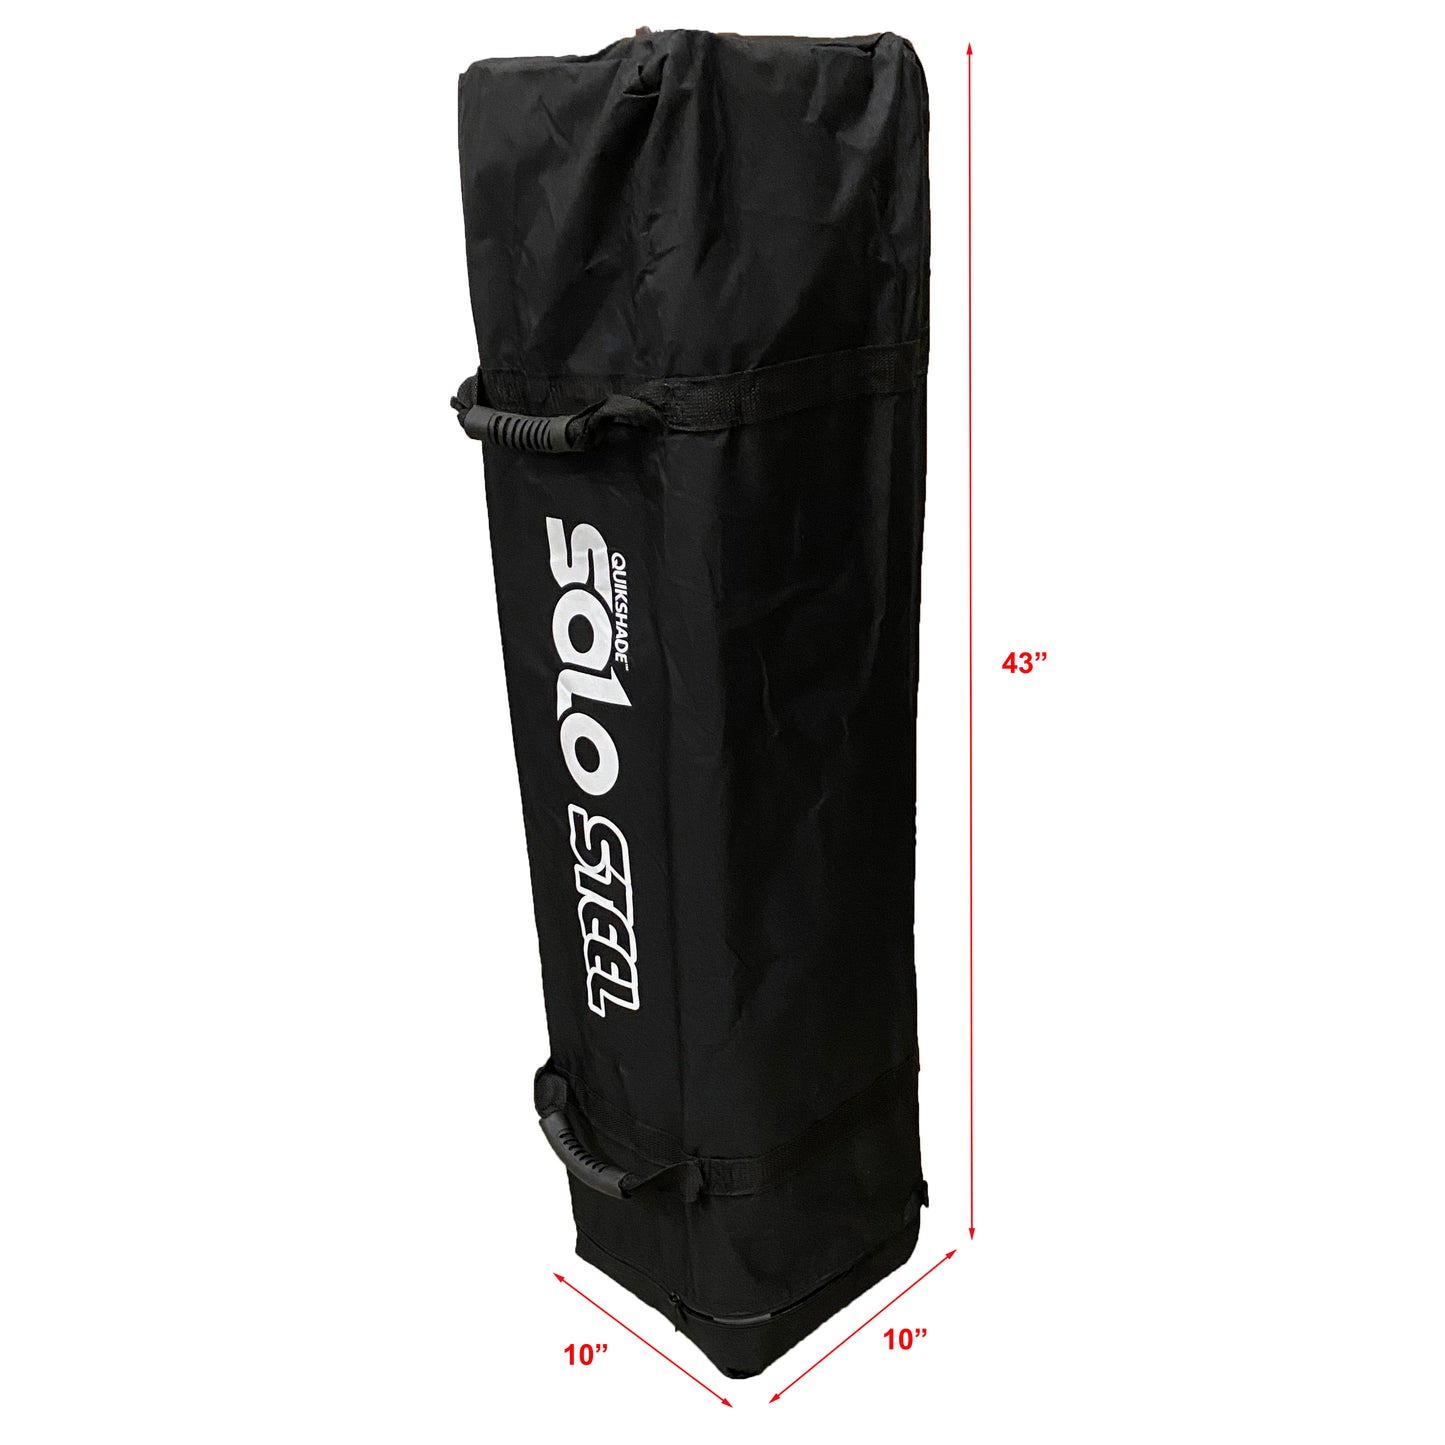 Wheeled Carry Bag 43" for Quik Shade Solo Steel 100 10 x 10 ft. Straight Leg Canopy